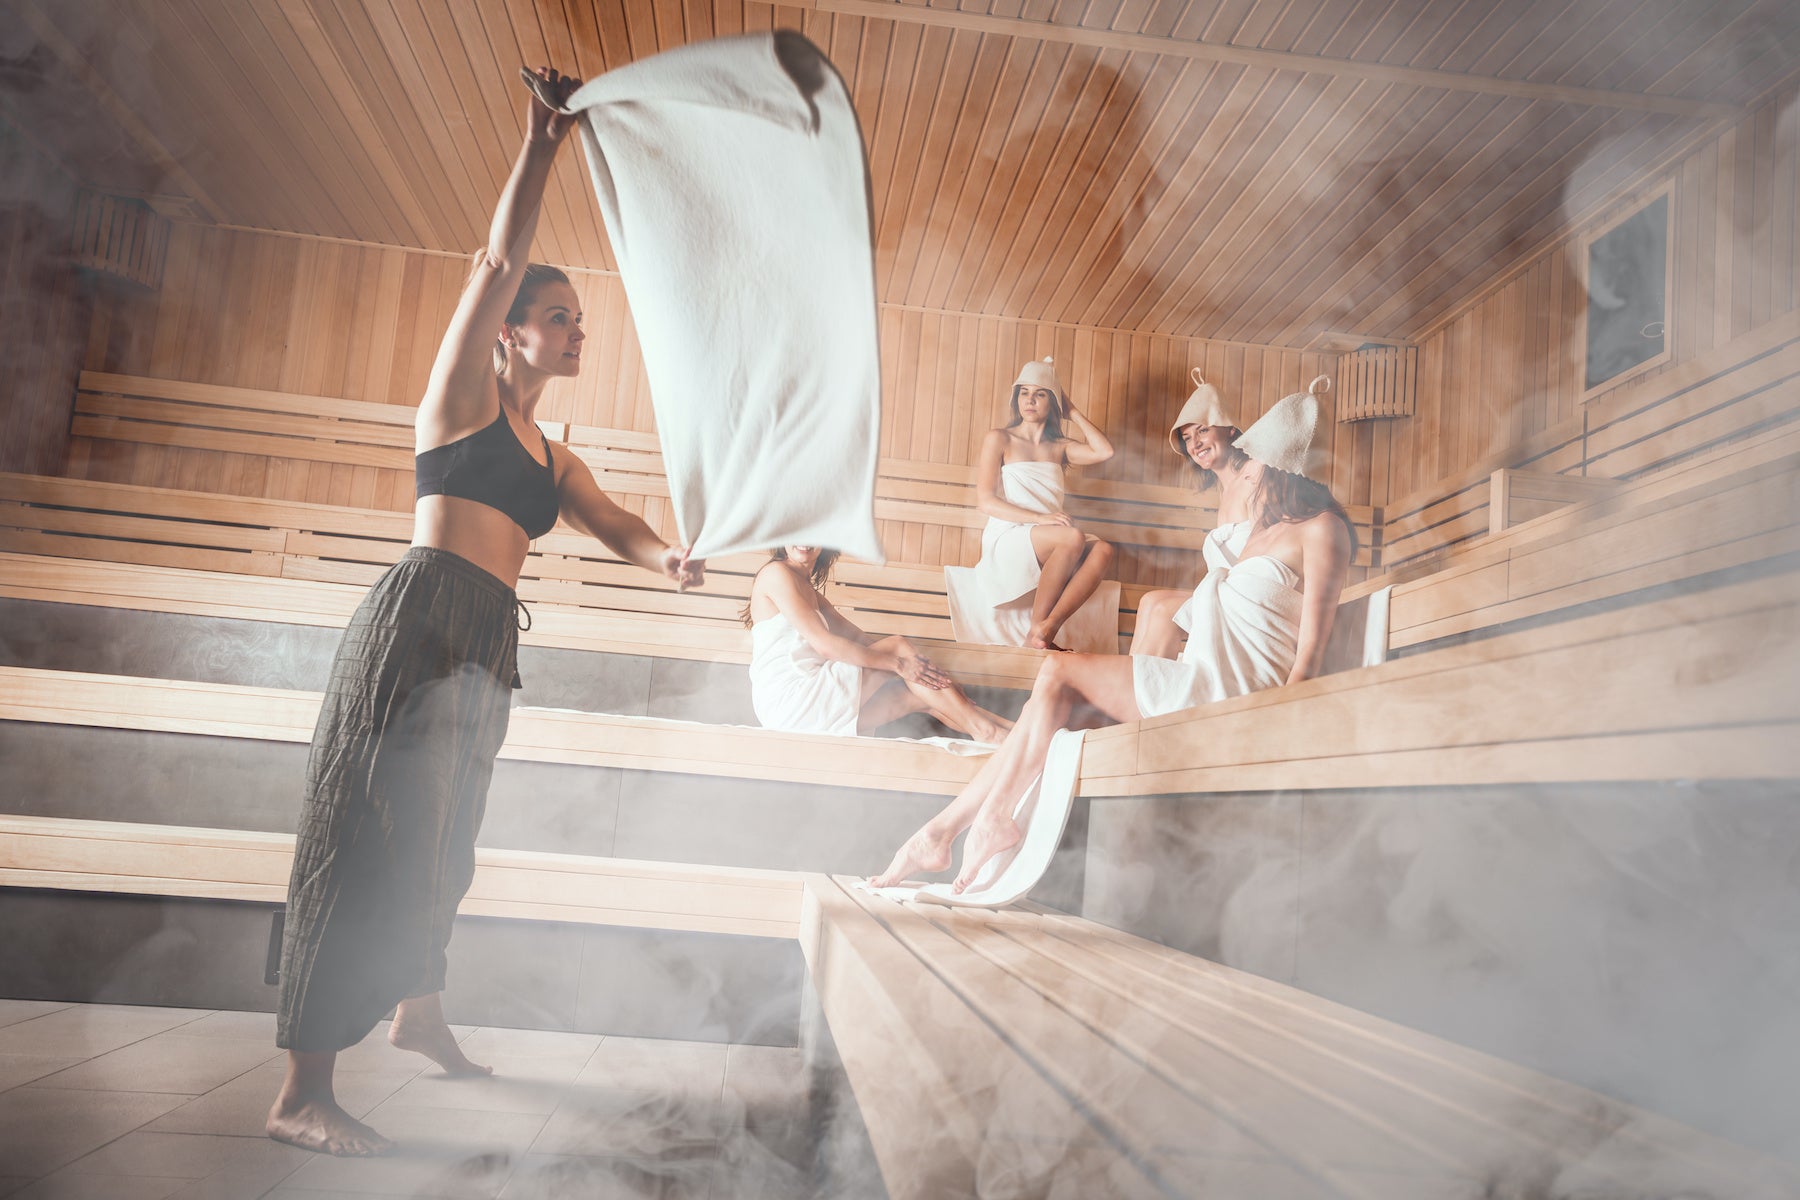 Sauna Culture and The Fuss About Aufguss